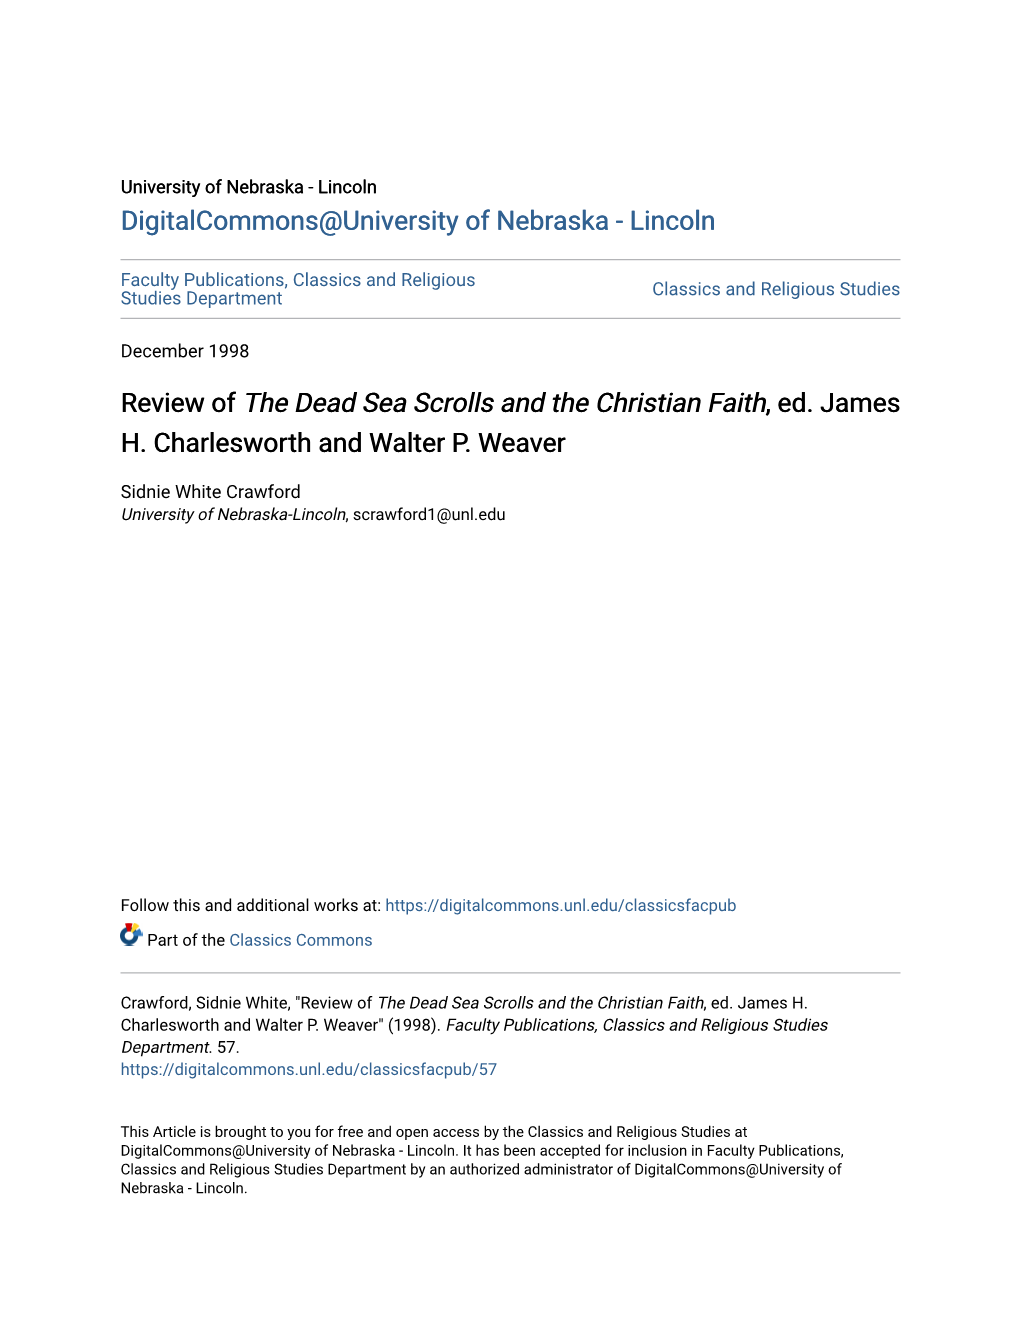 Review of the Dead Sea Scrolls and the Christian Faith, Ed. James H